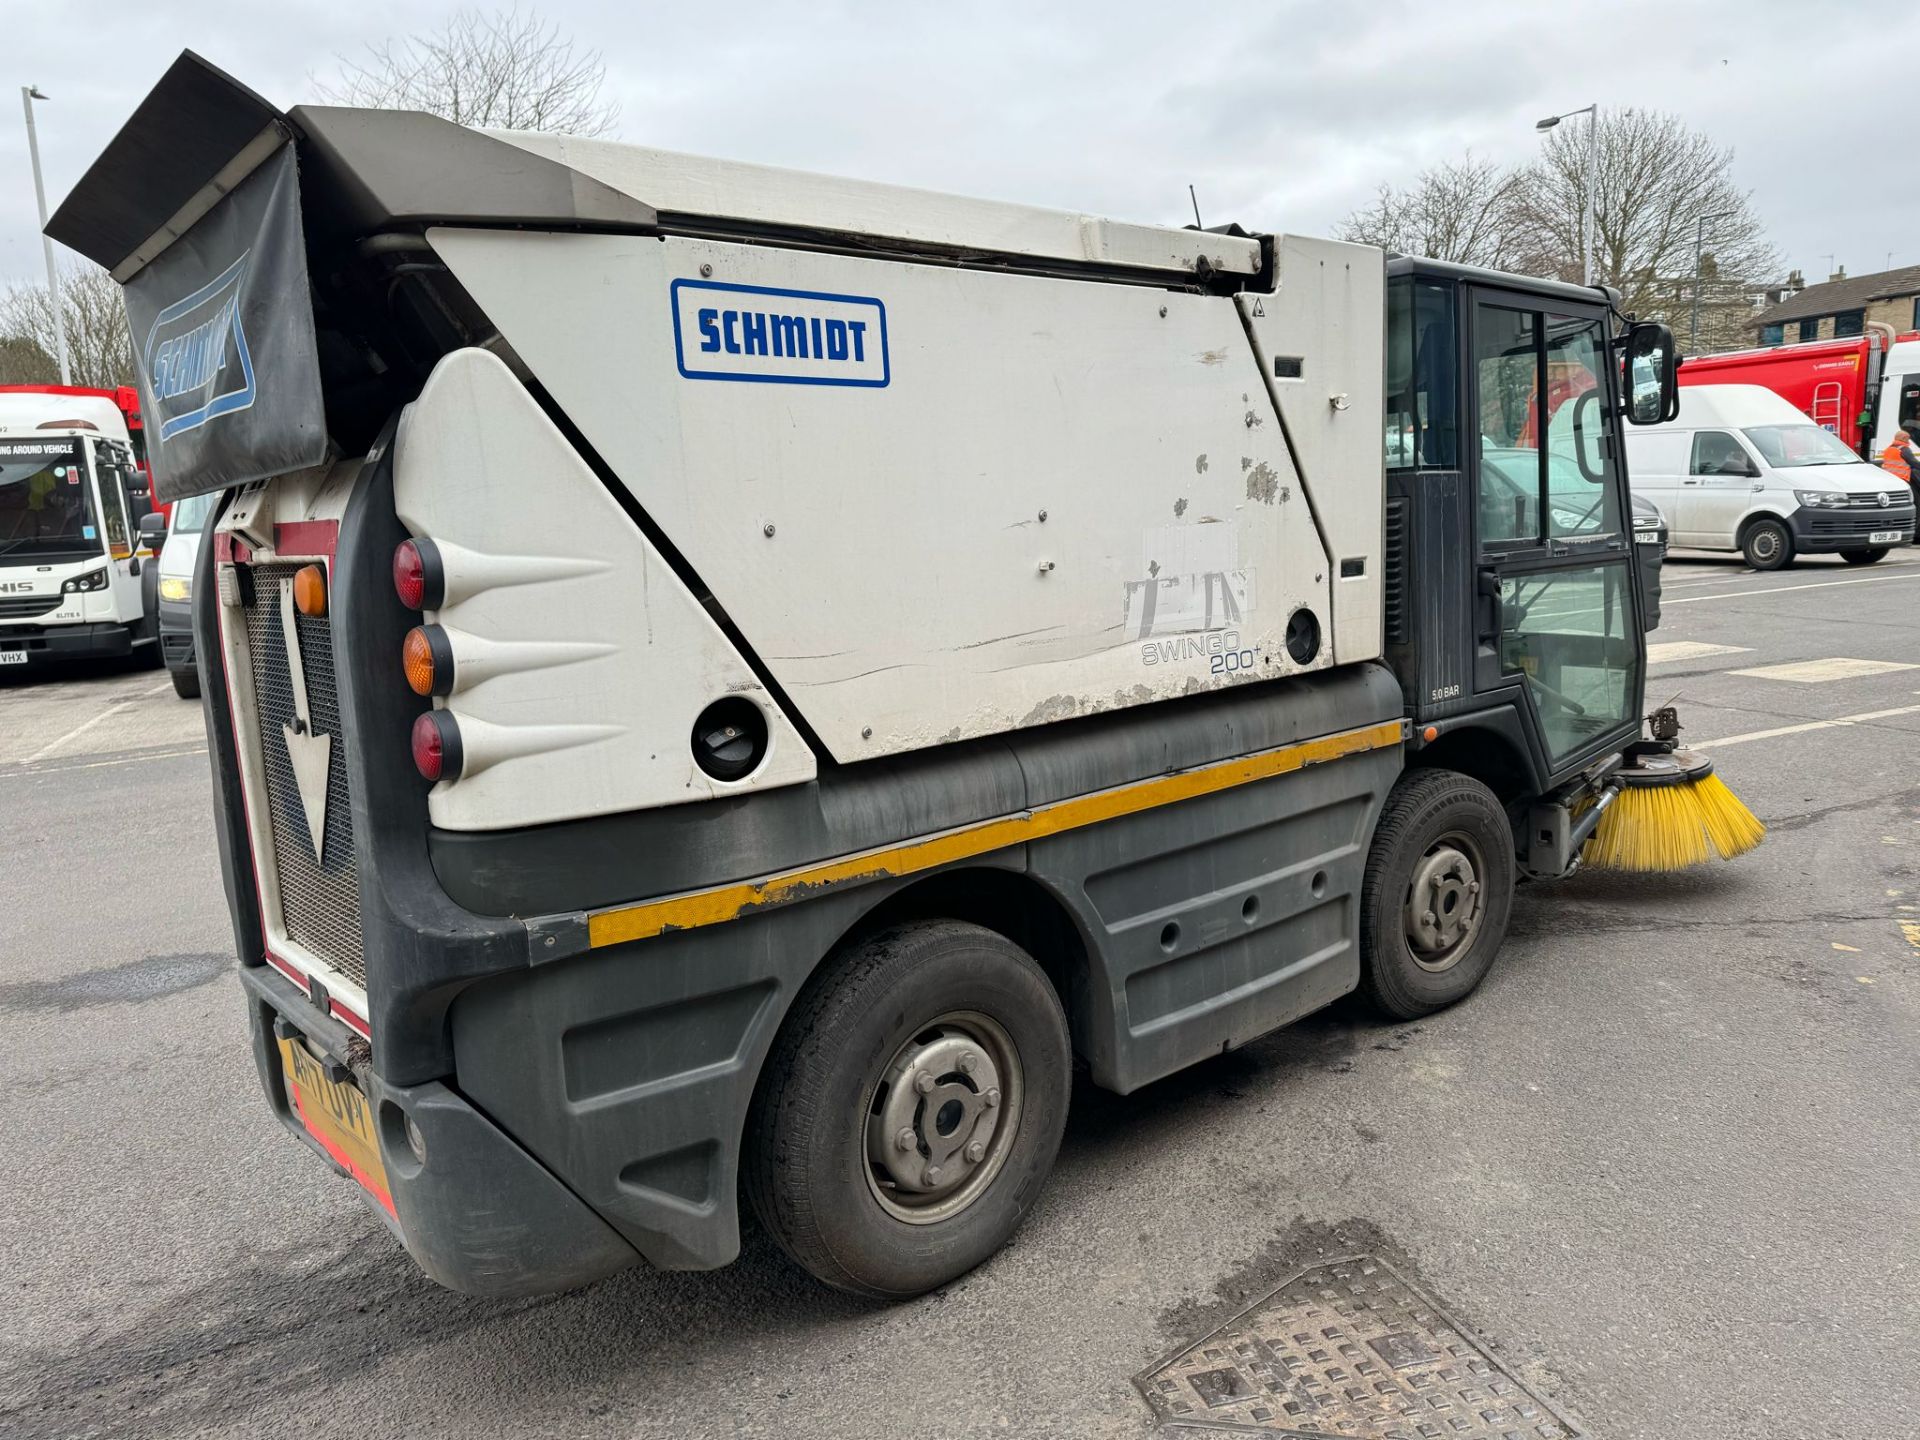 2017, SCHMIDT - Compact Road Sweeper (Ex-Council fleet owned and maintained) - Image 3 of 32